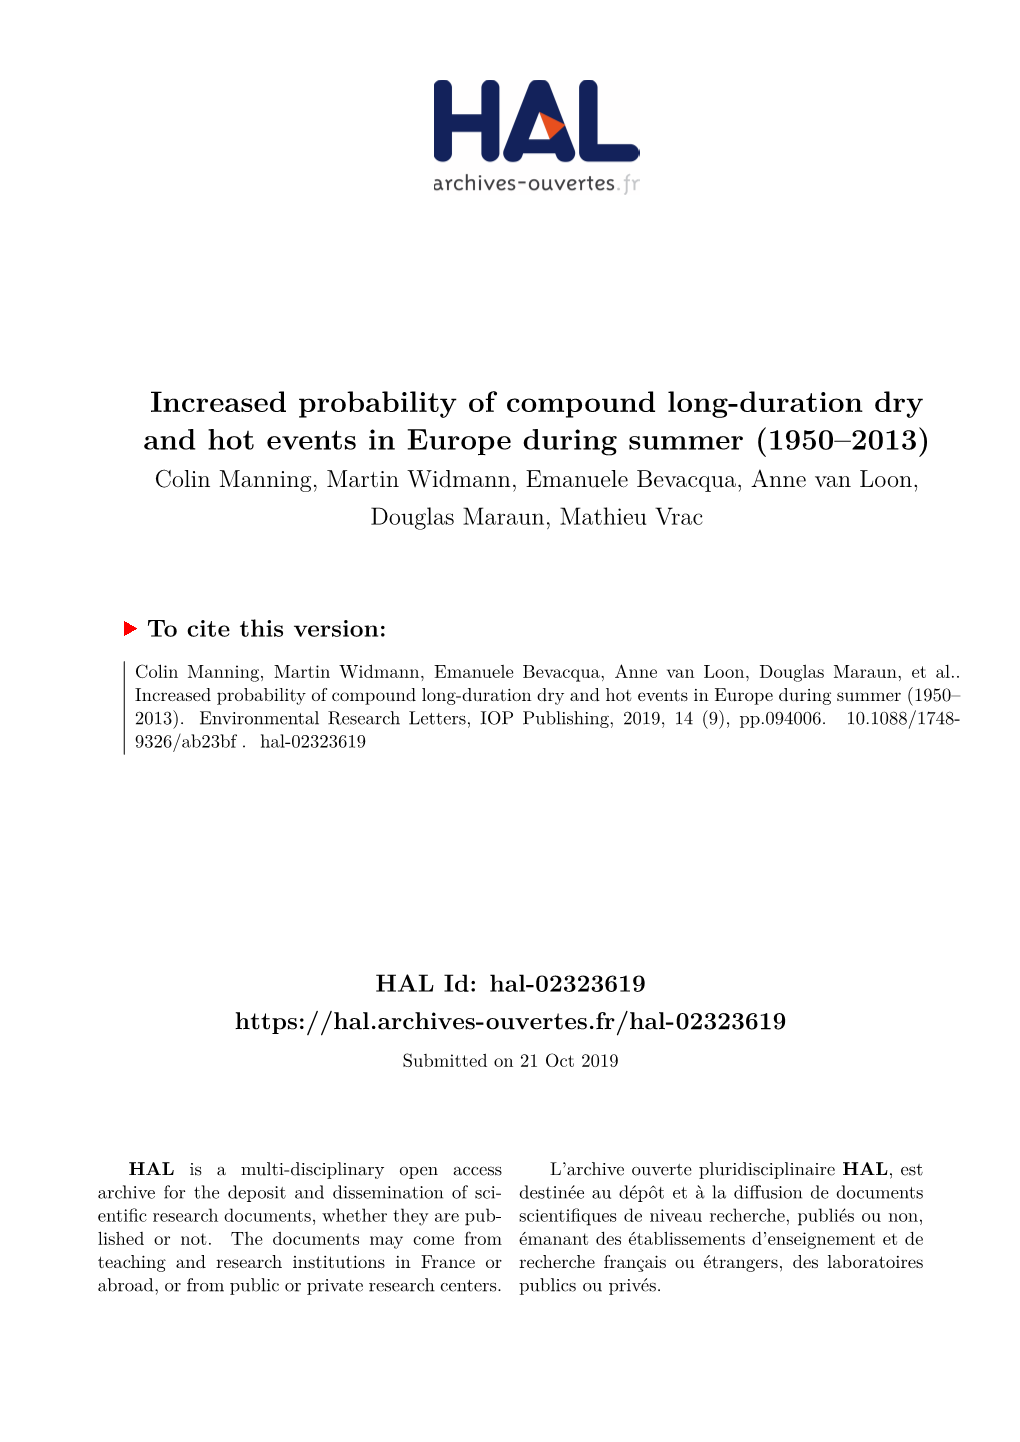 Increased Probability of Compound Long-Duration Dry and Hot Events In